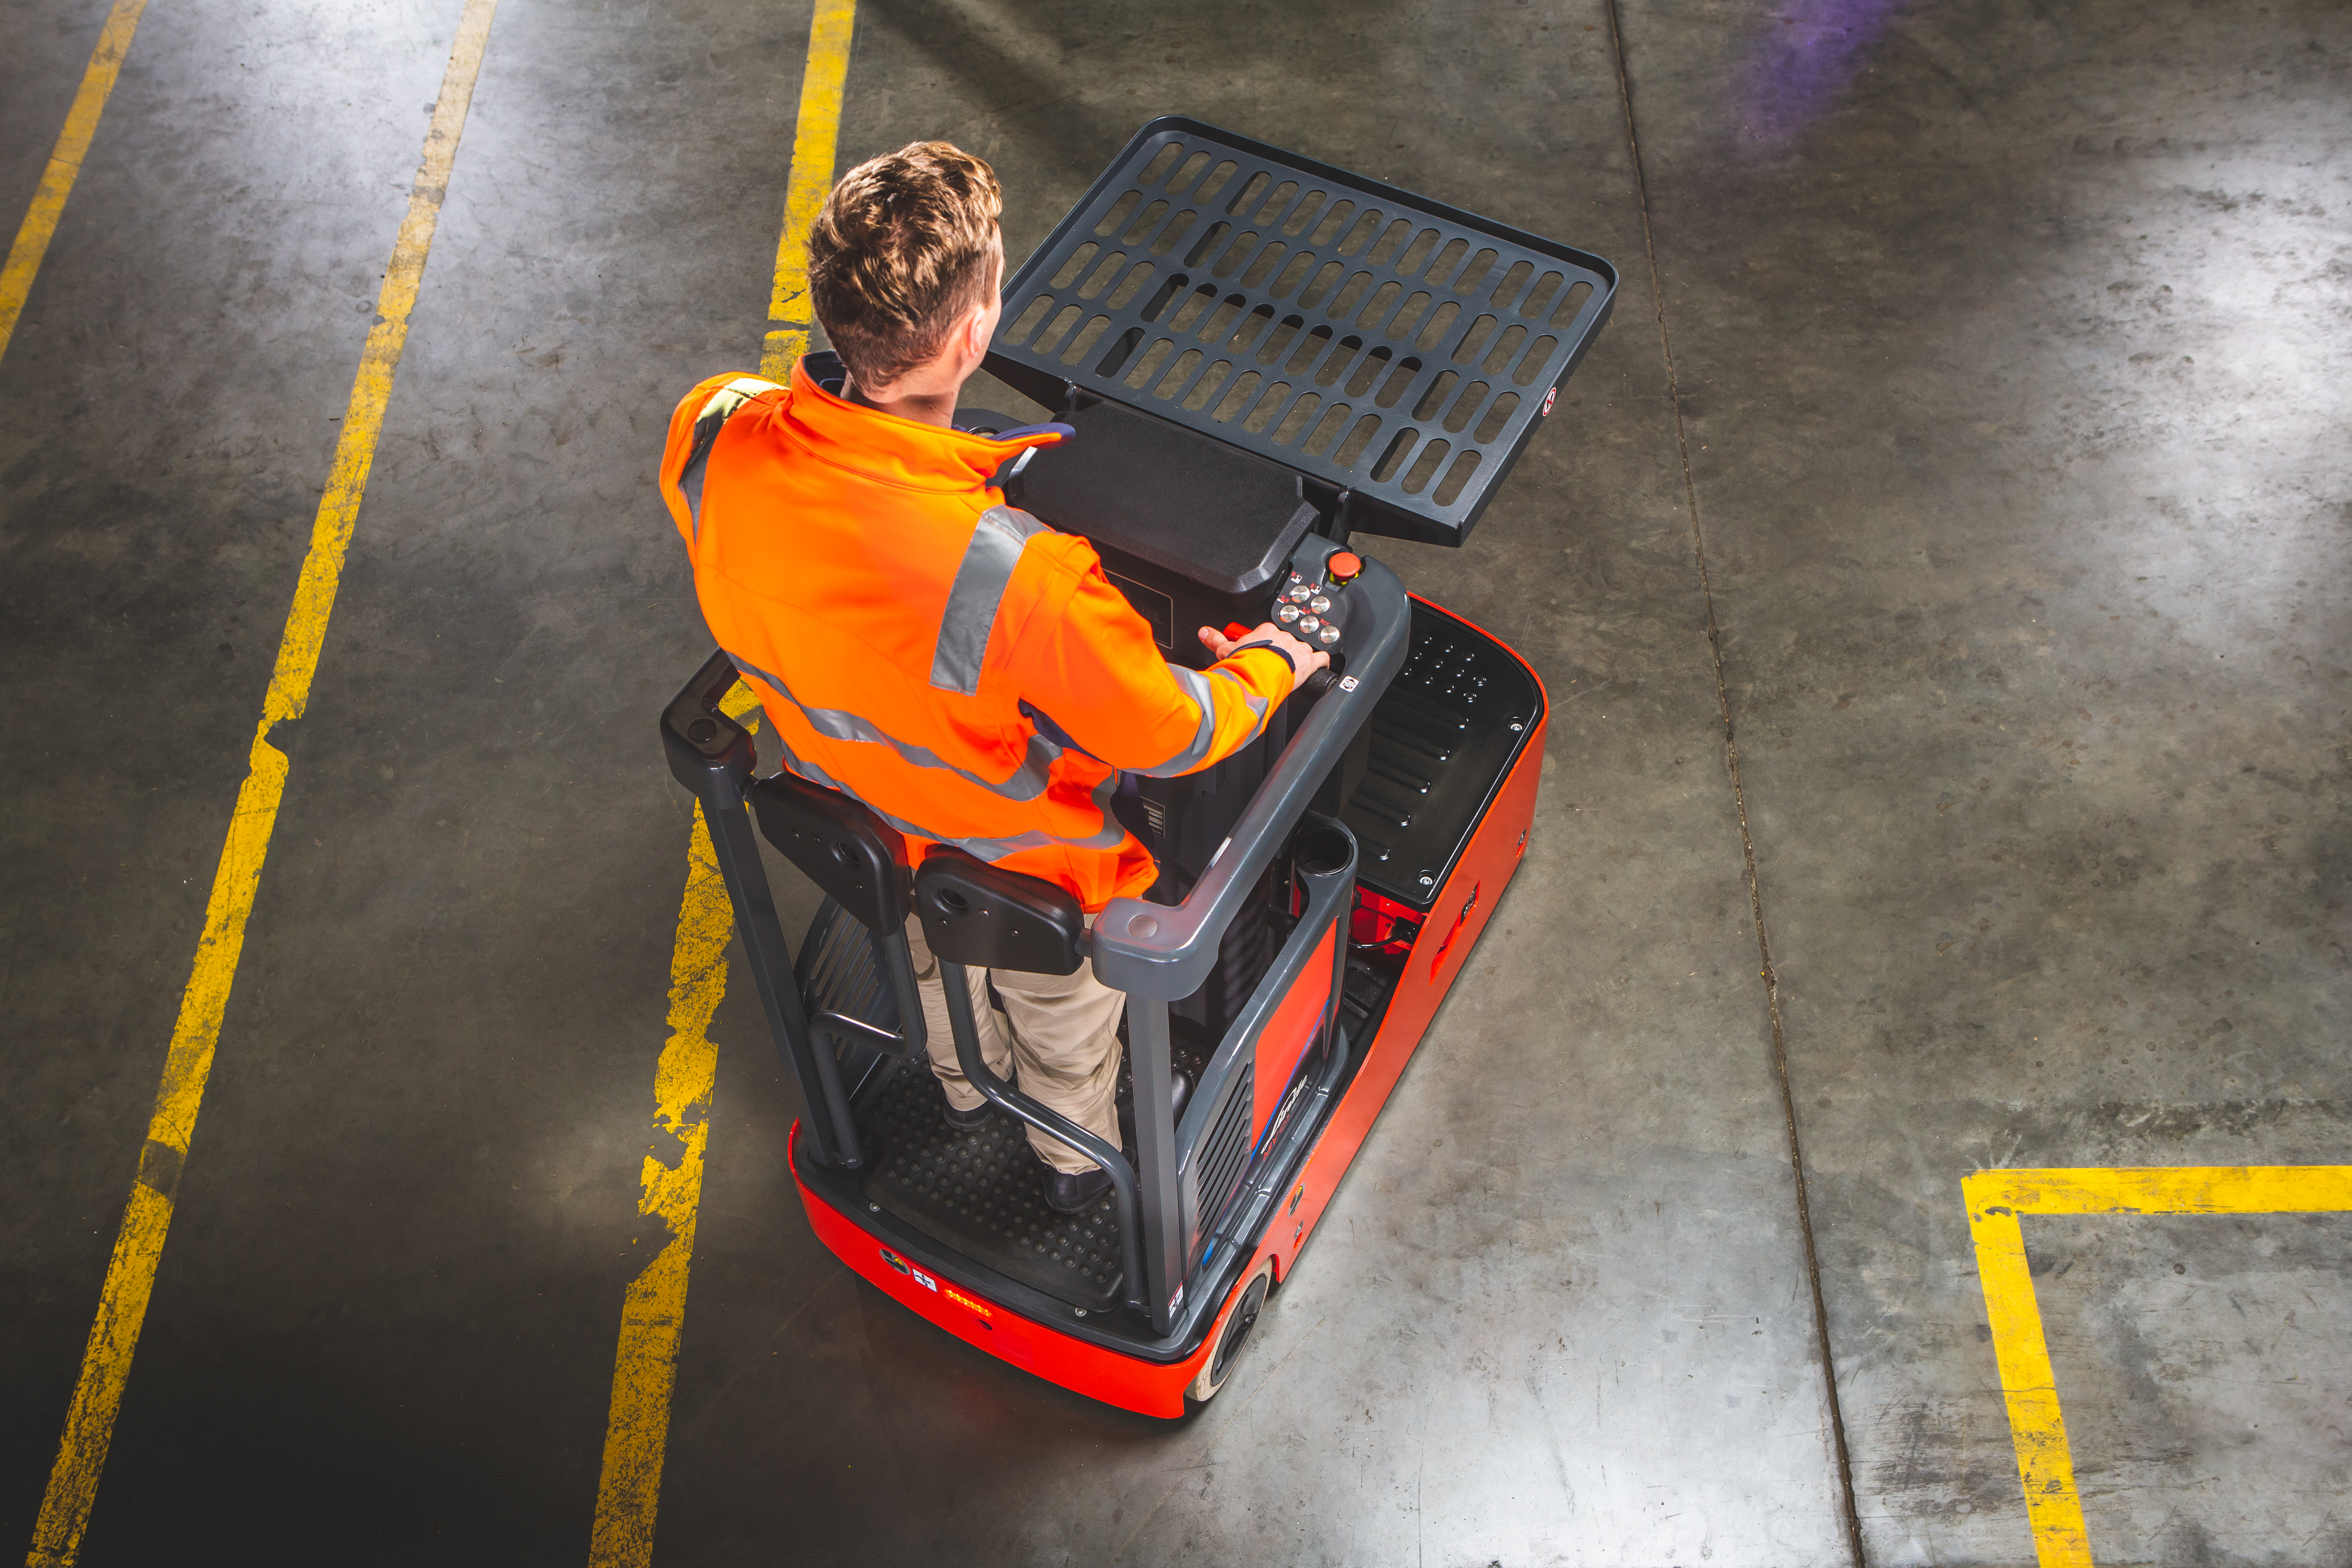 MV01Electric Order Picker in operation - from above